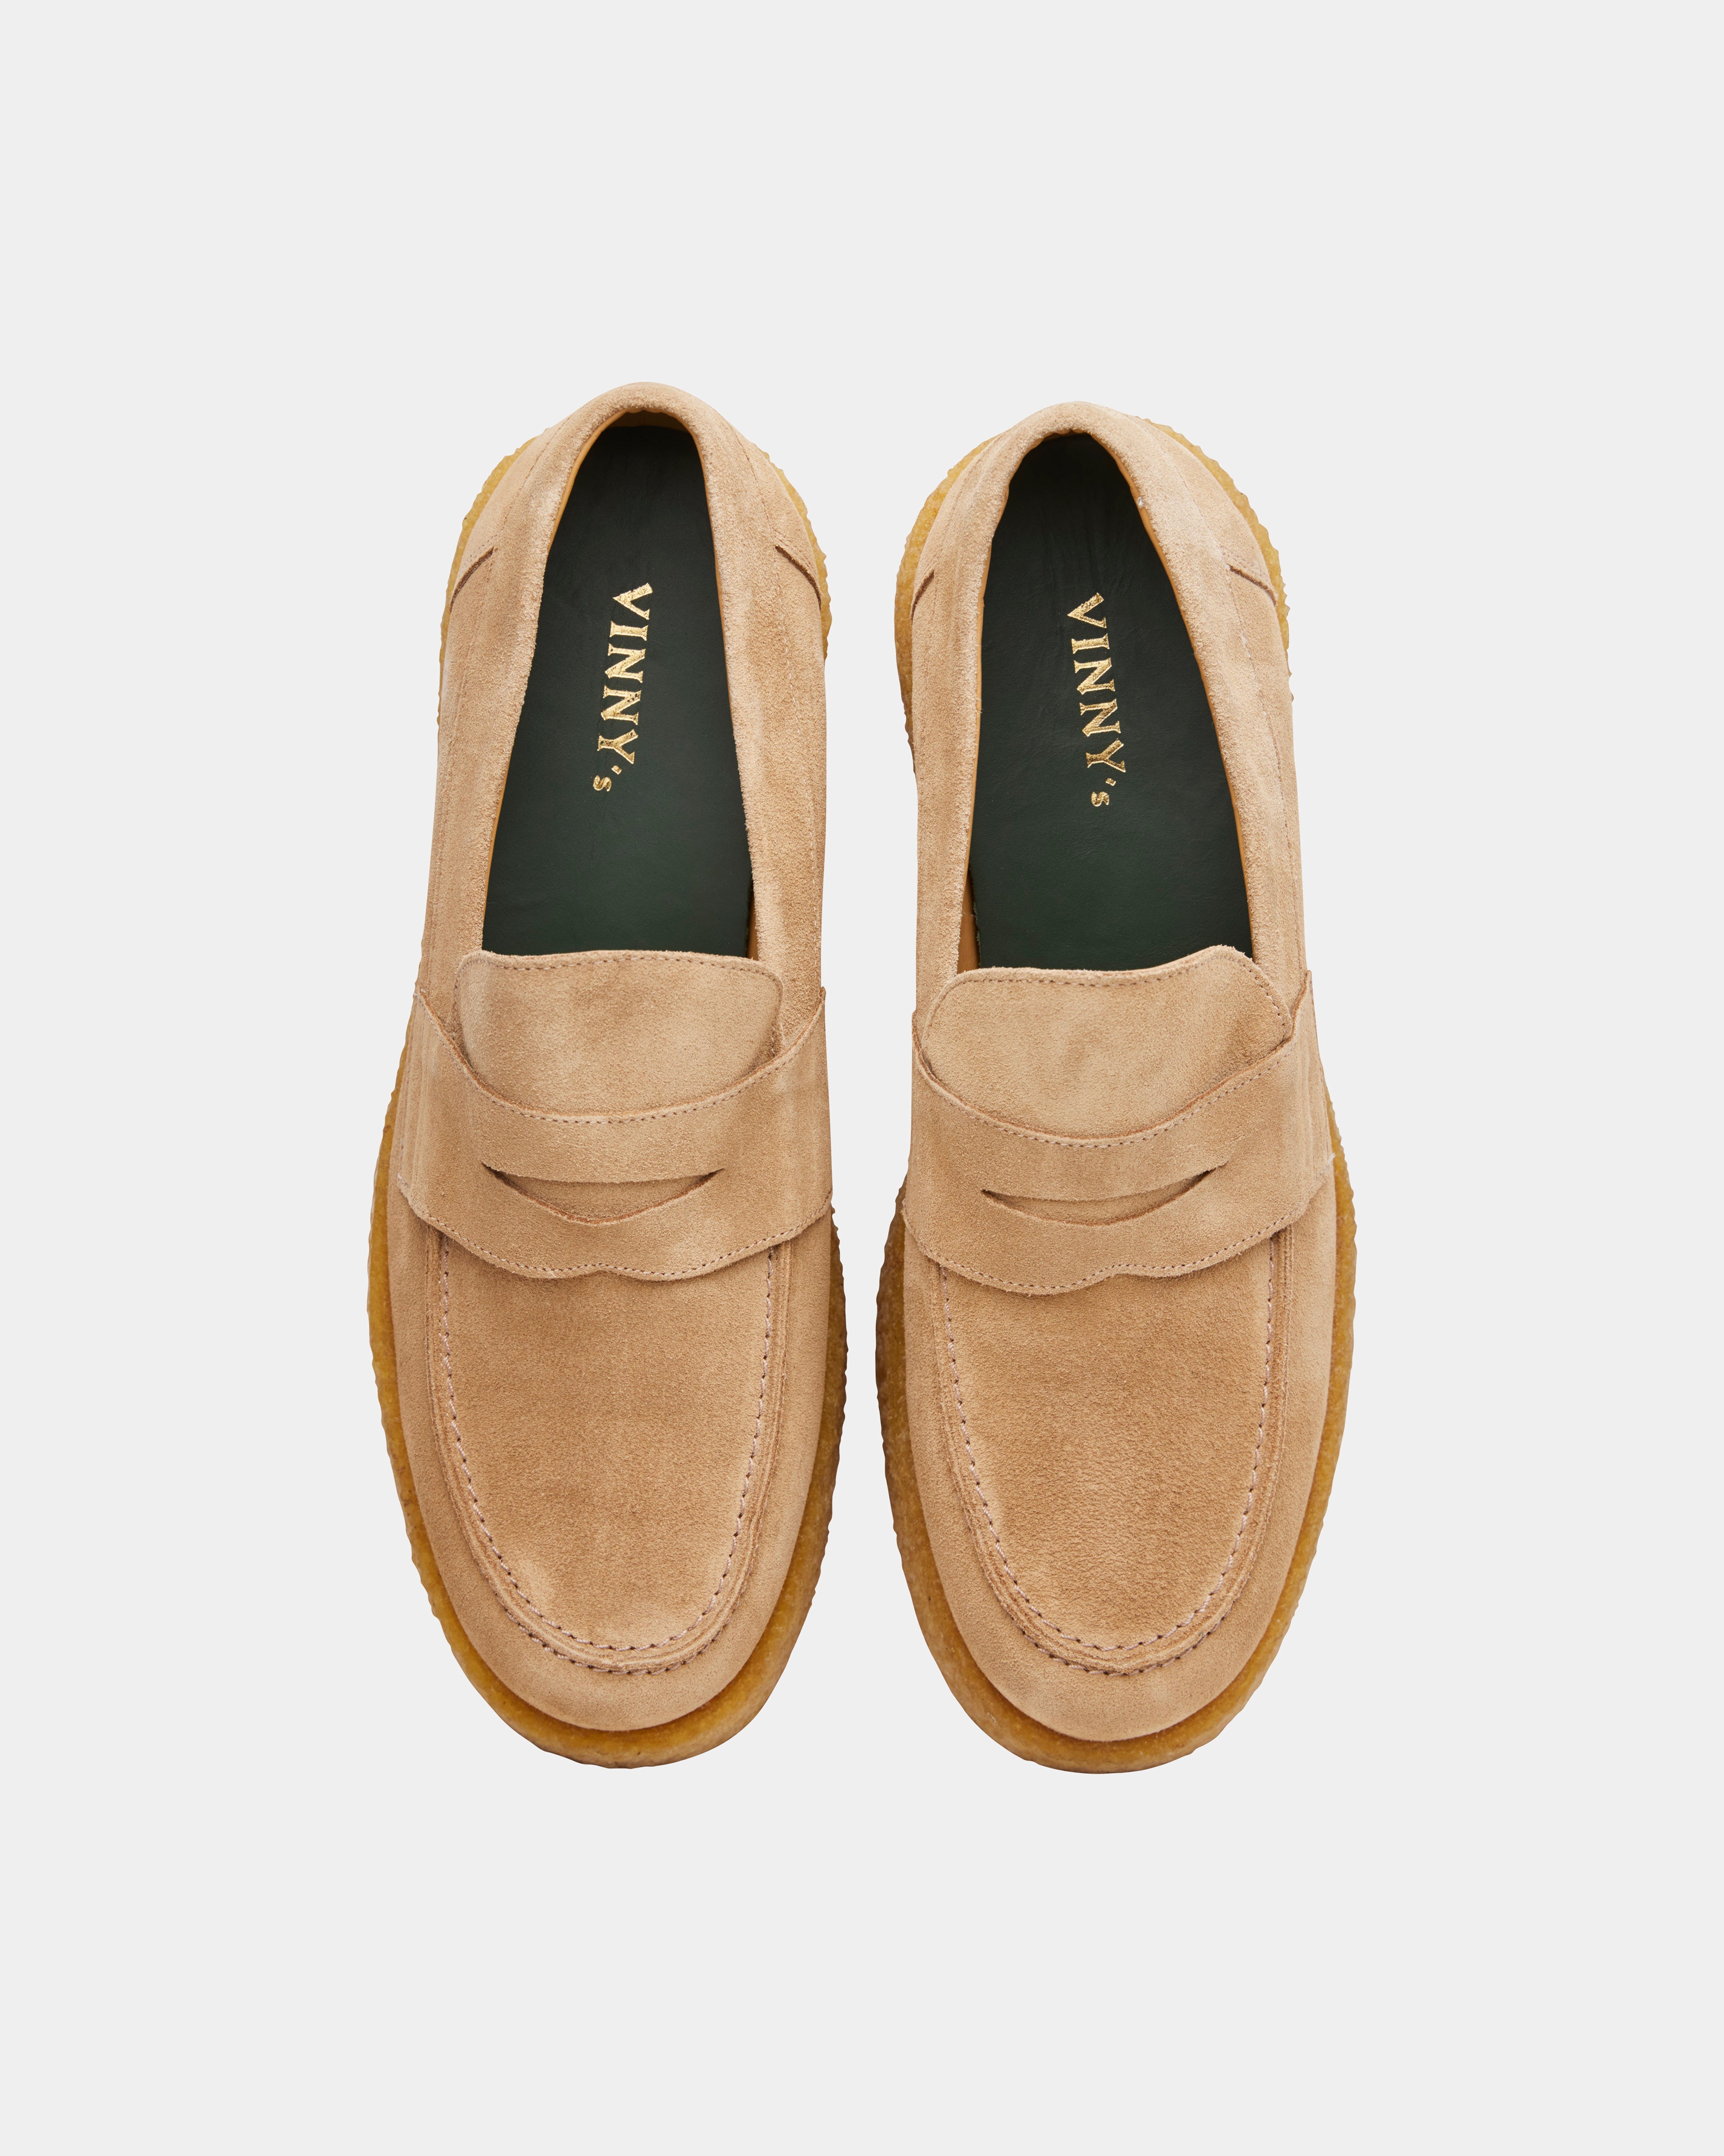 Women's Creeper in sand suede